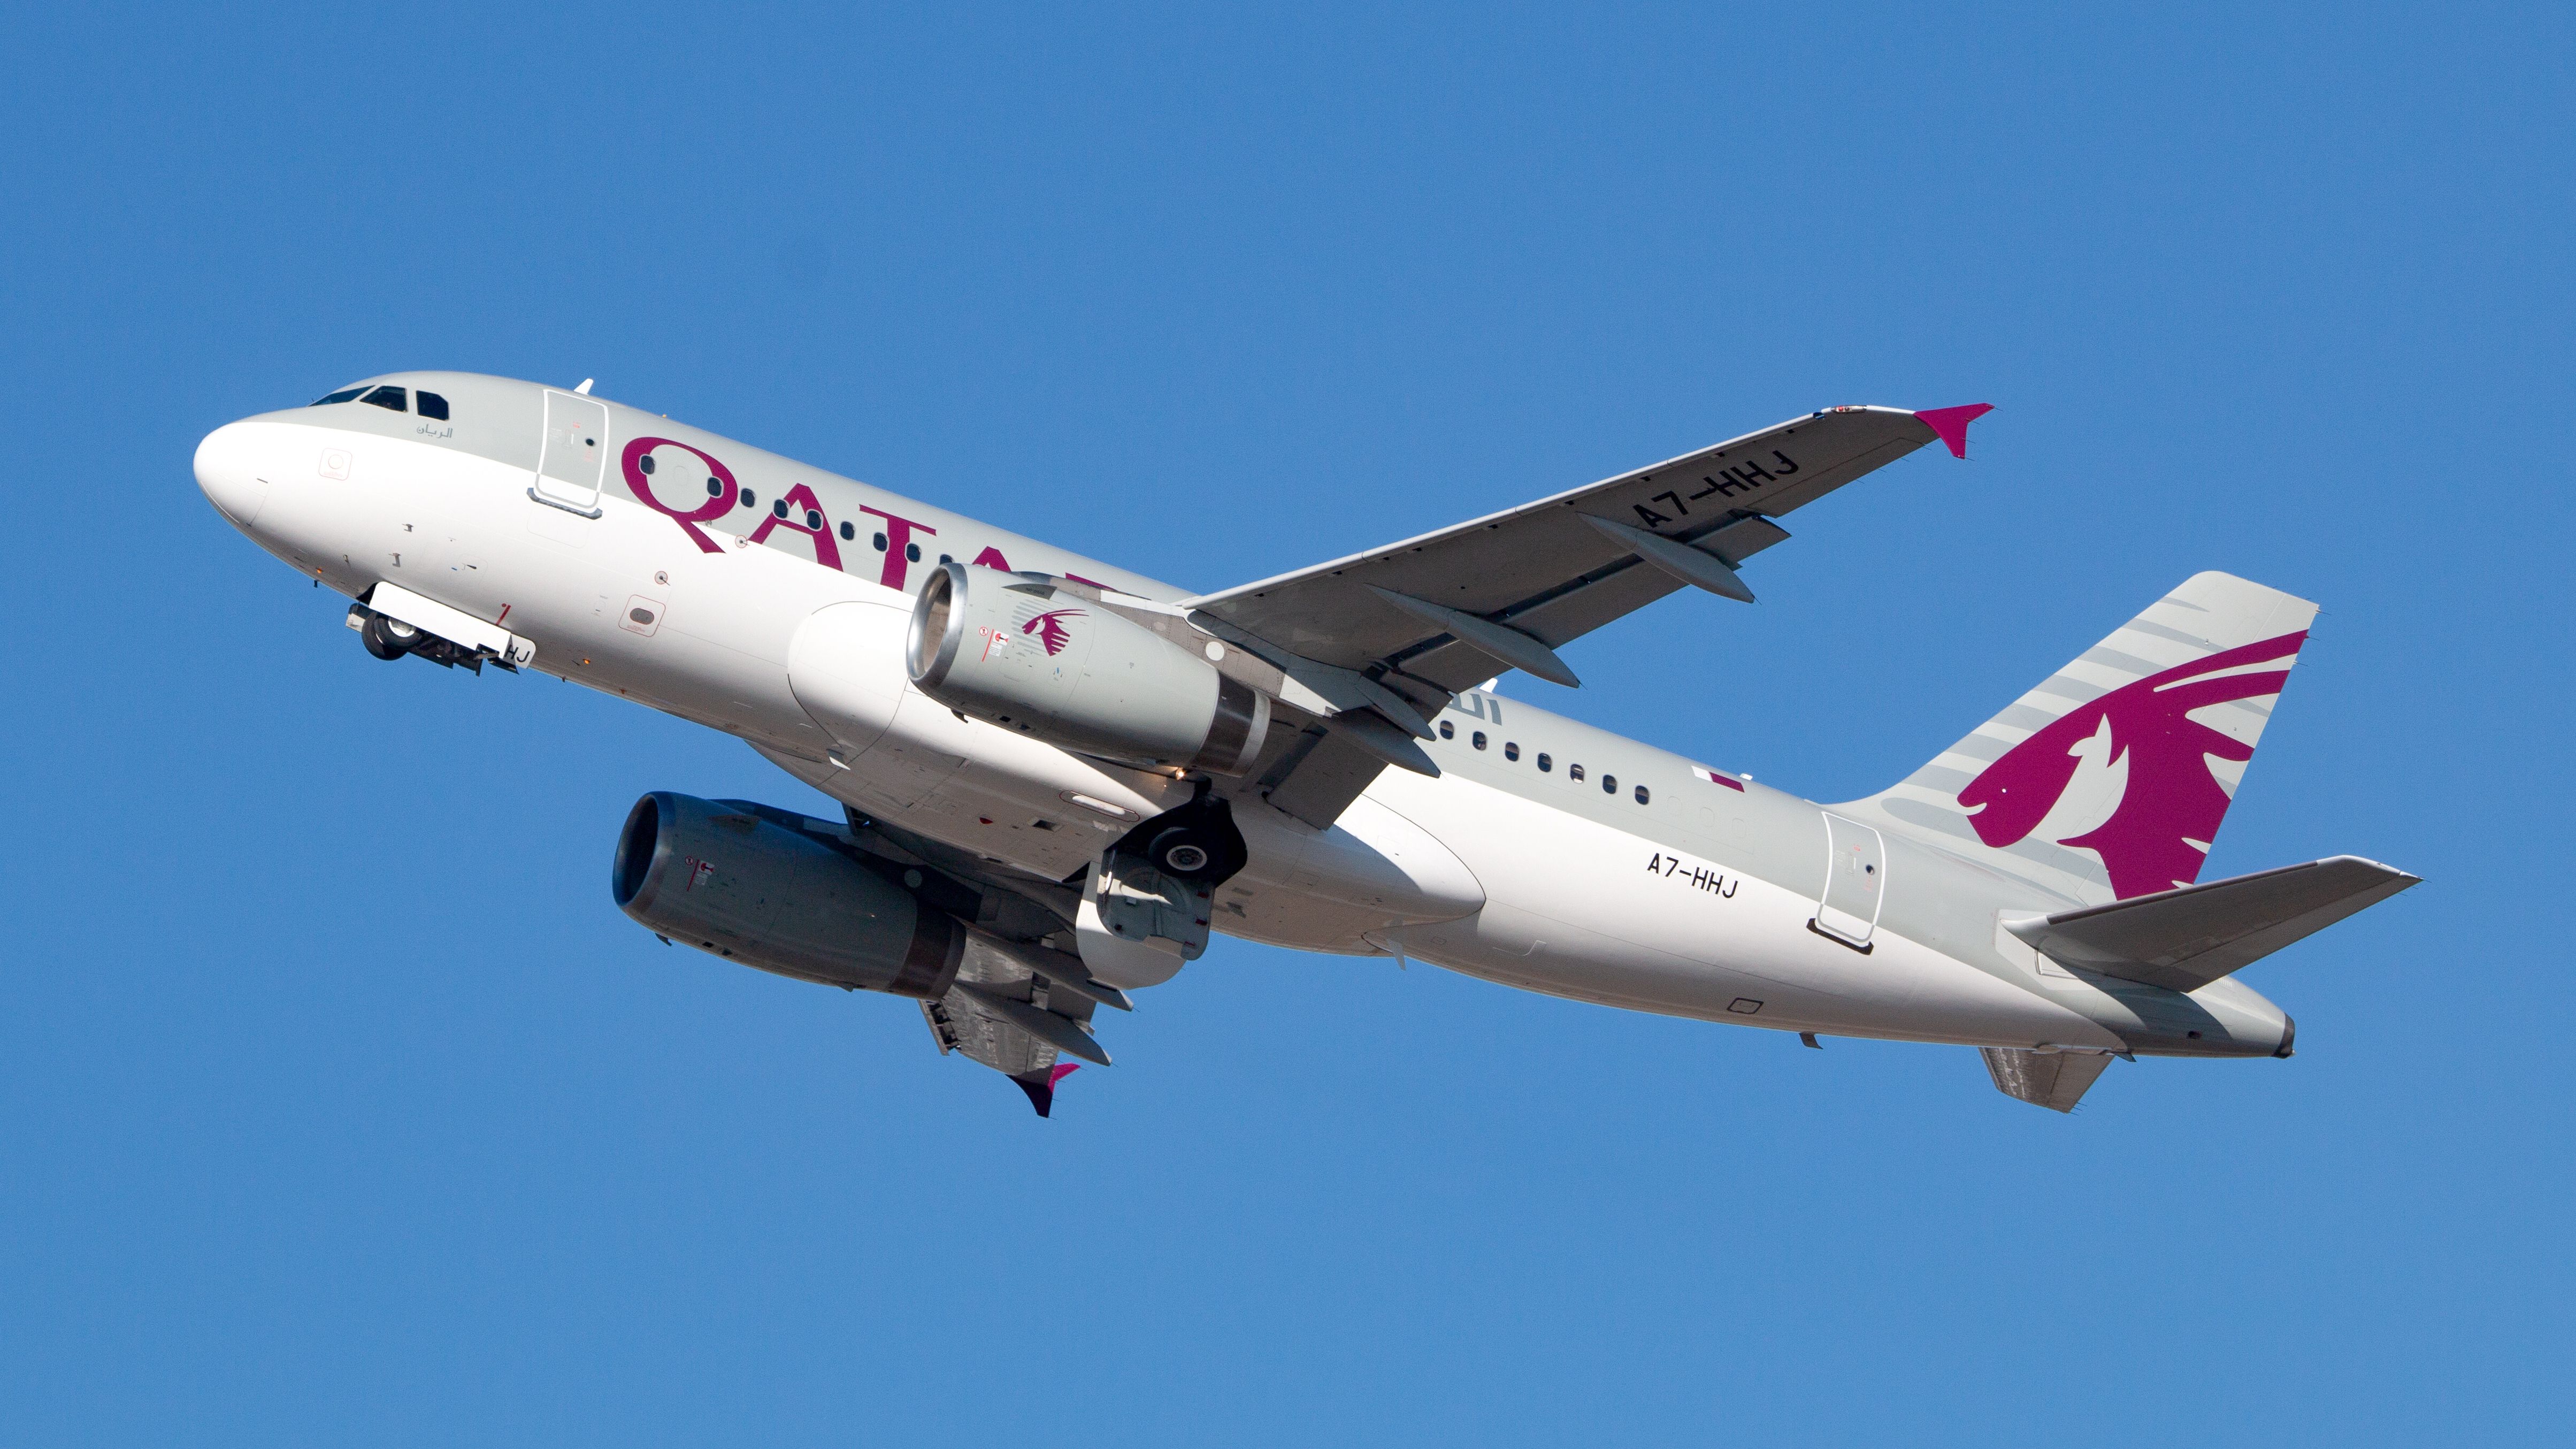 A Qatar Airways Airbus A319 flying in the sky.